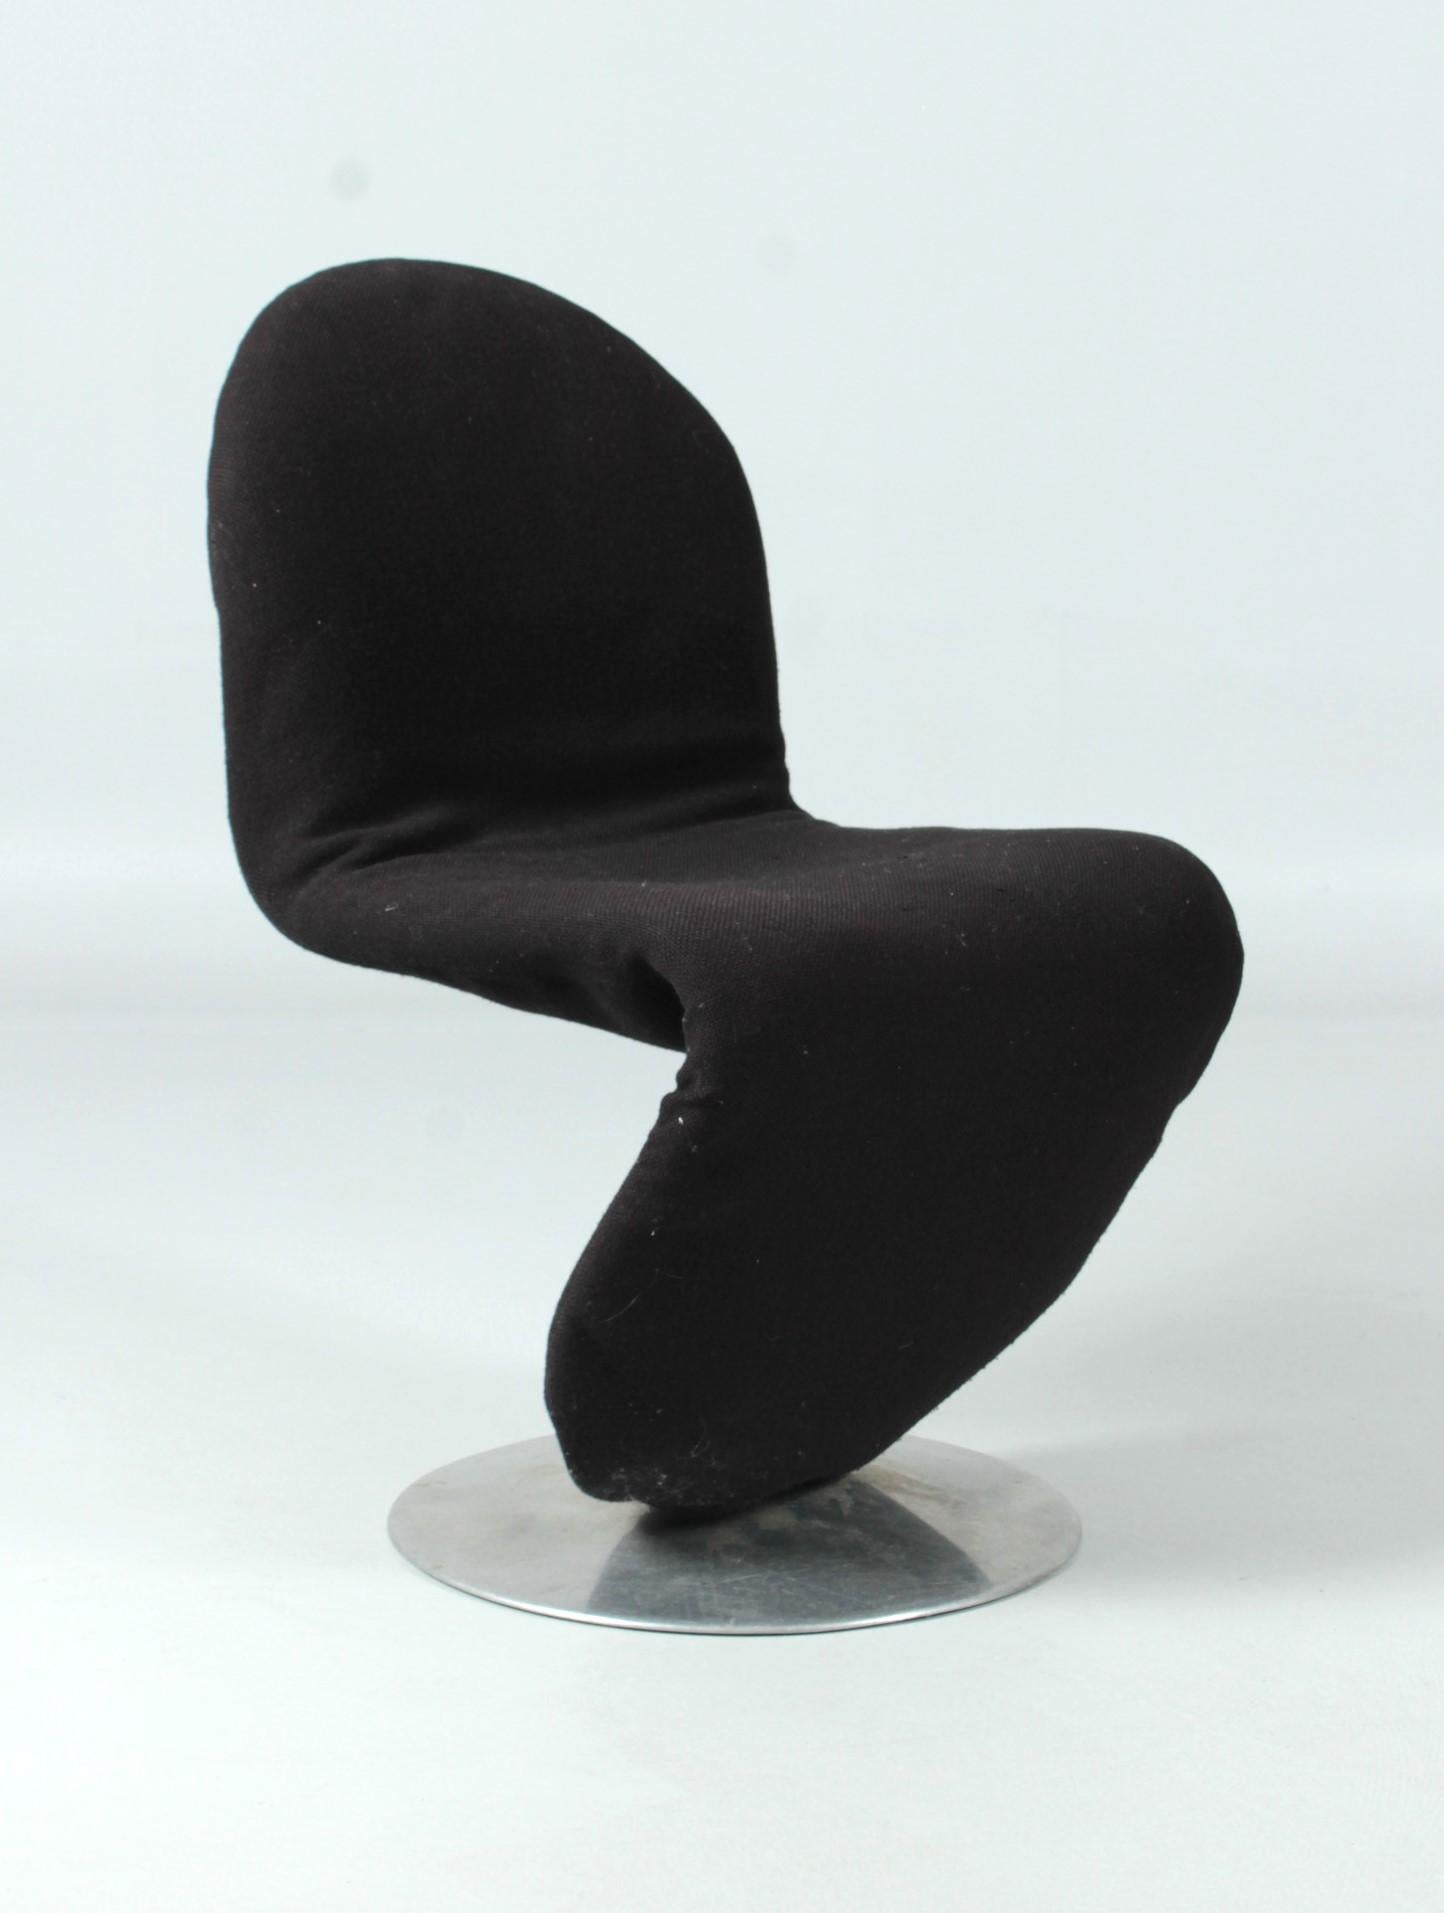 Vintage 1-2-3 chair designed by Verner Panton.
Made probably in the 1970s. The chair is in original condition. The fabric is a little bit stretched out at the back, there is minimal damage to the fabric. In one of the photos the spot is marked with